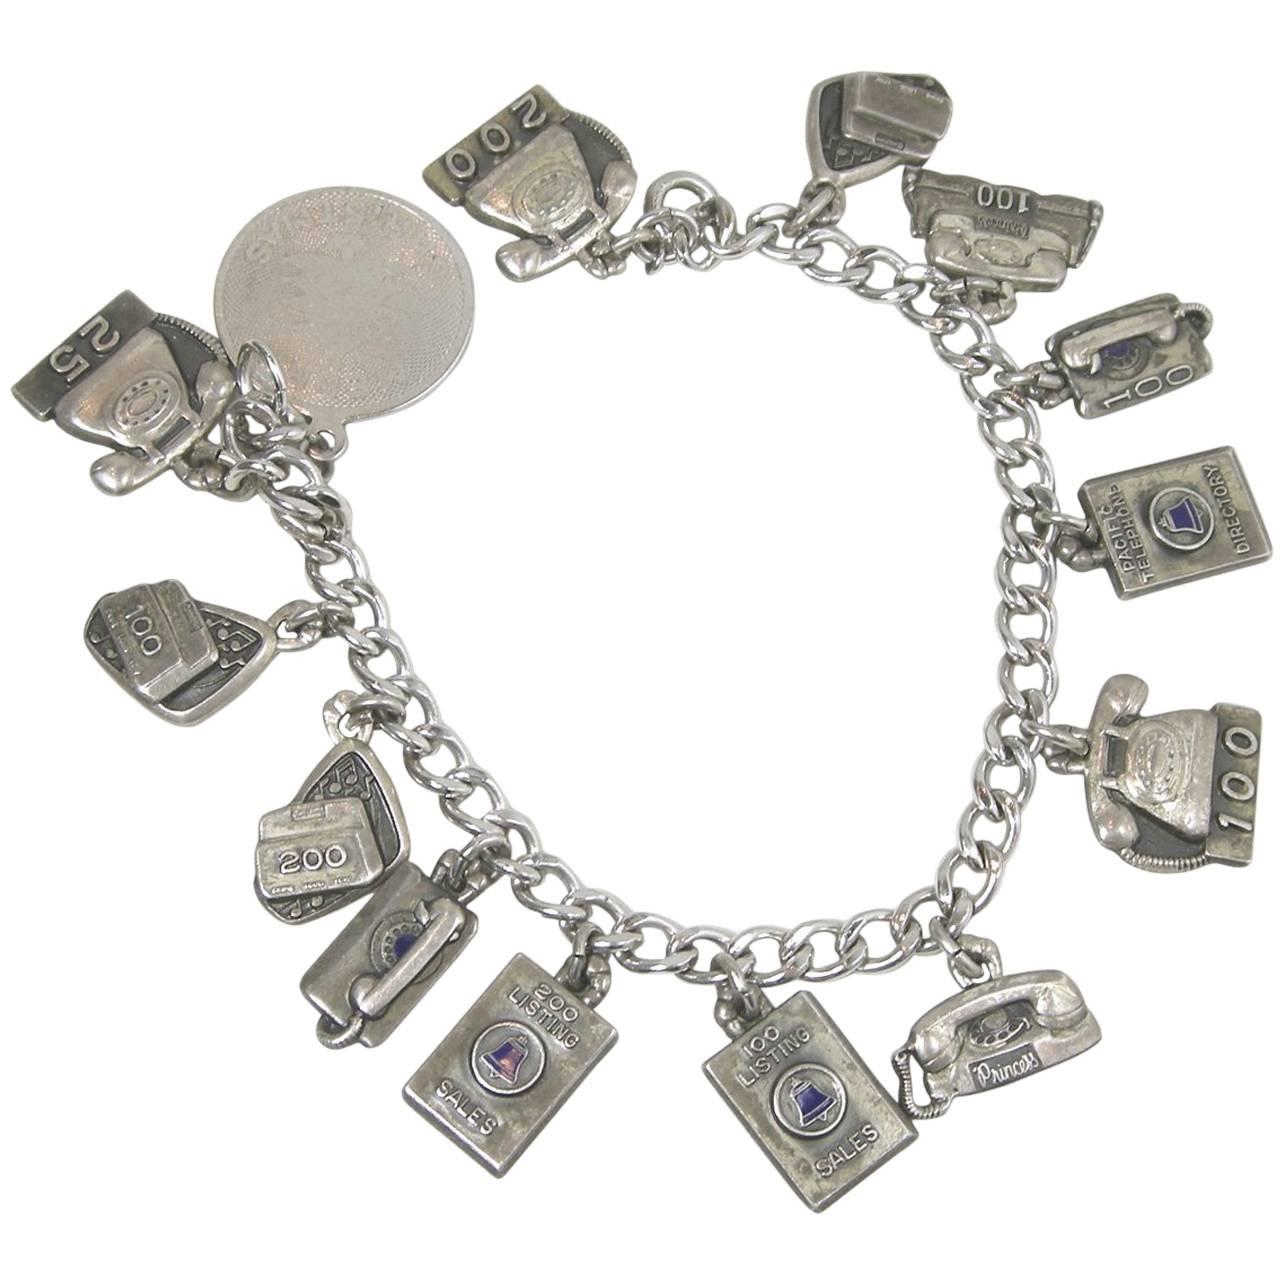 SALE Genuine Sterling Silver MID CENTURY Charm Bracelet With Eight Charms